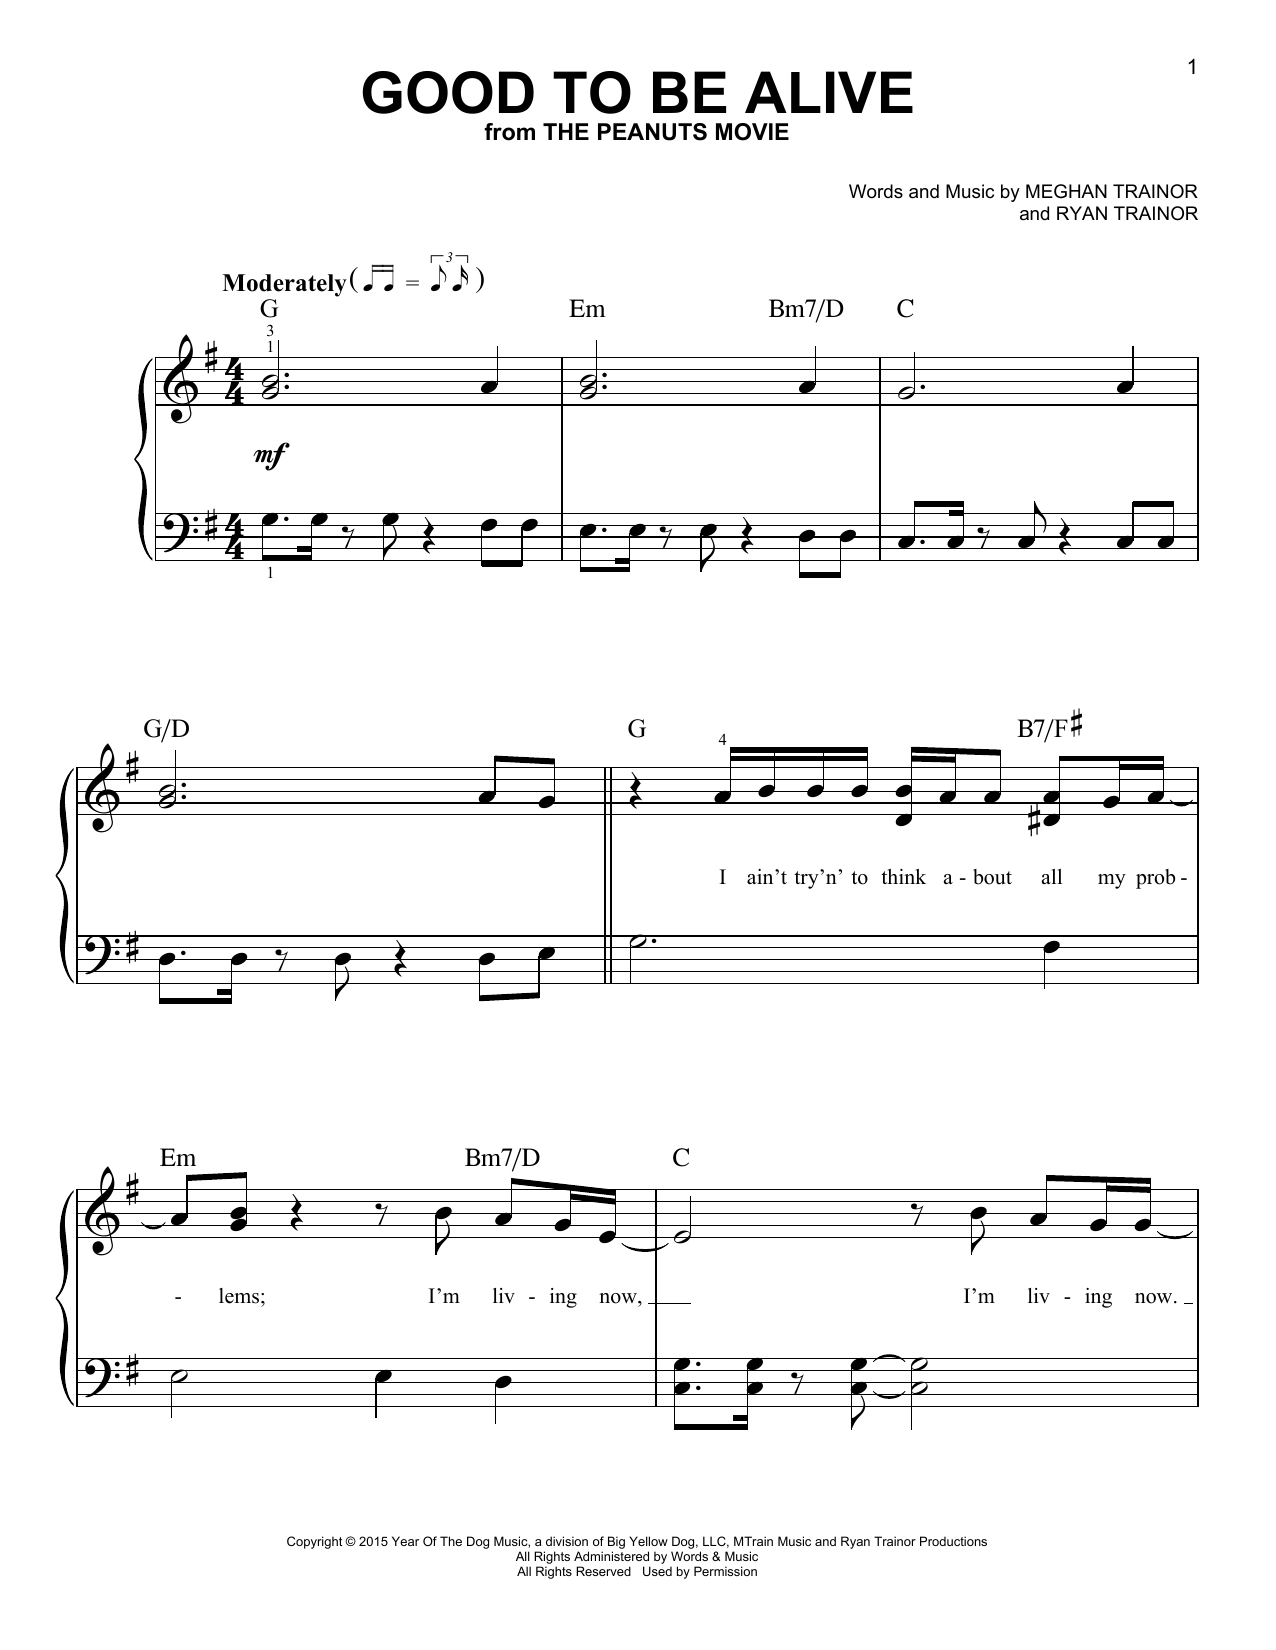 Download Meghan Trainor Good To Be Alive Sheet Music